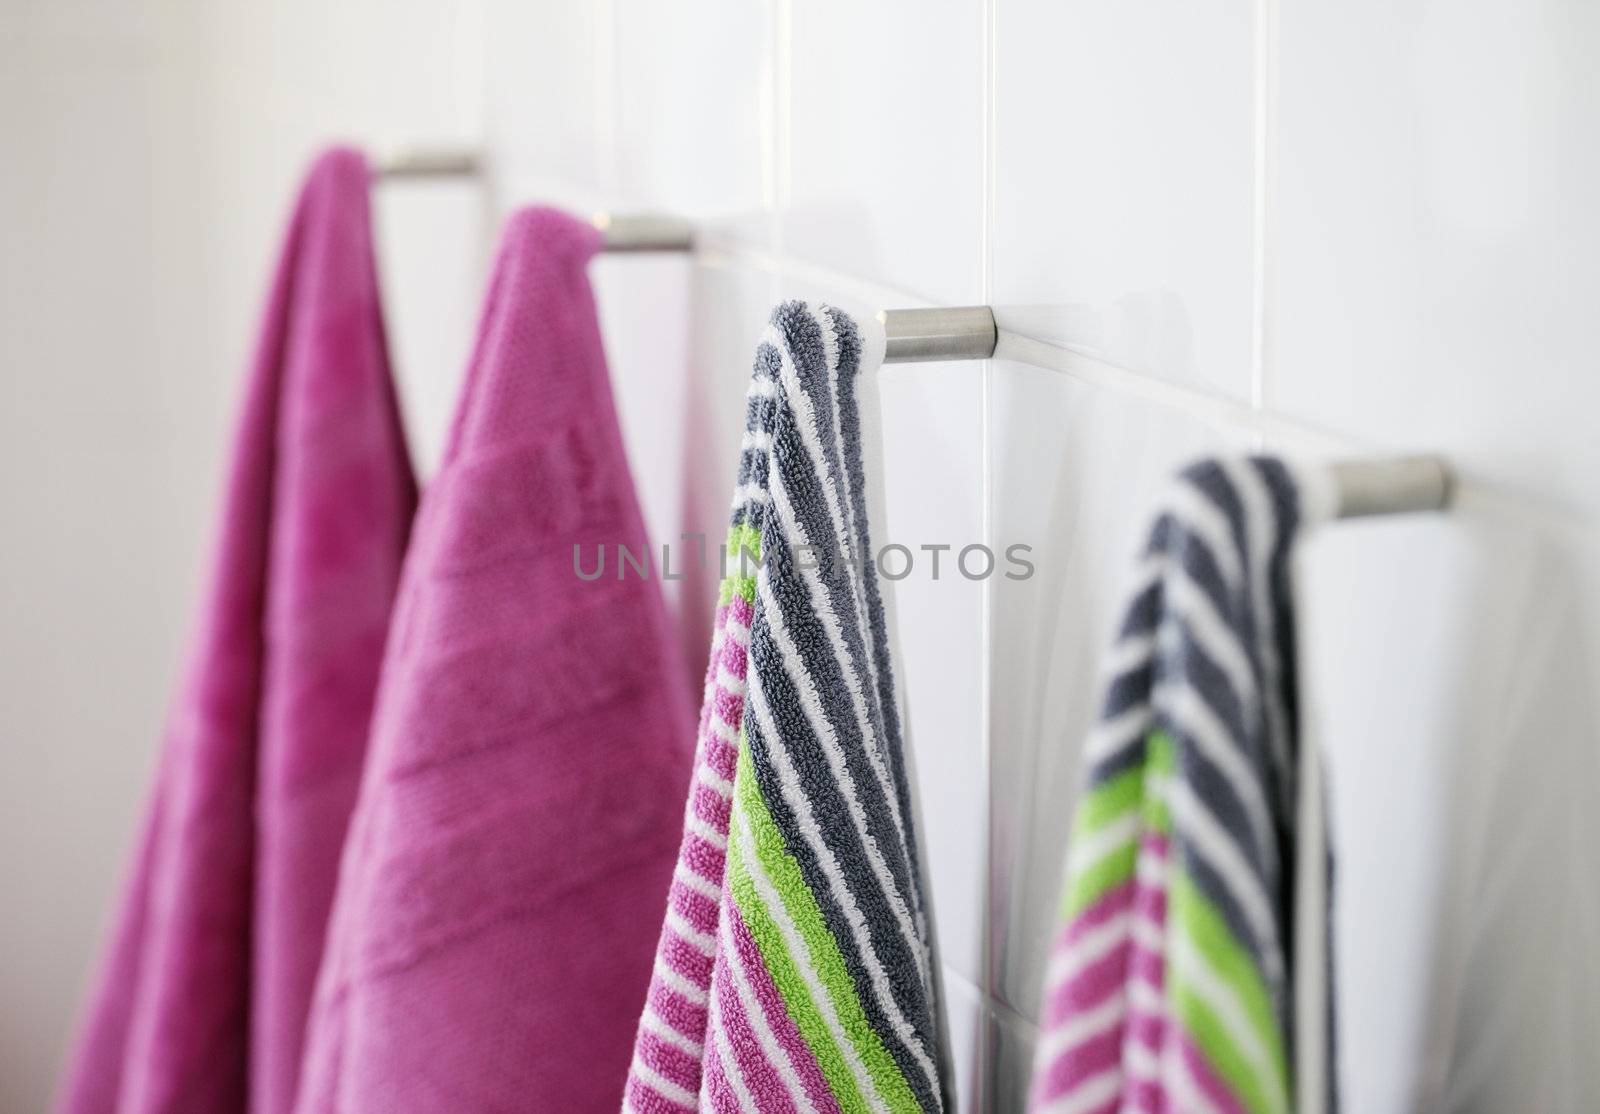 Clean towels by Stocksnapper